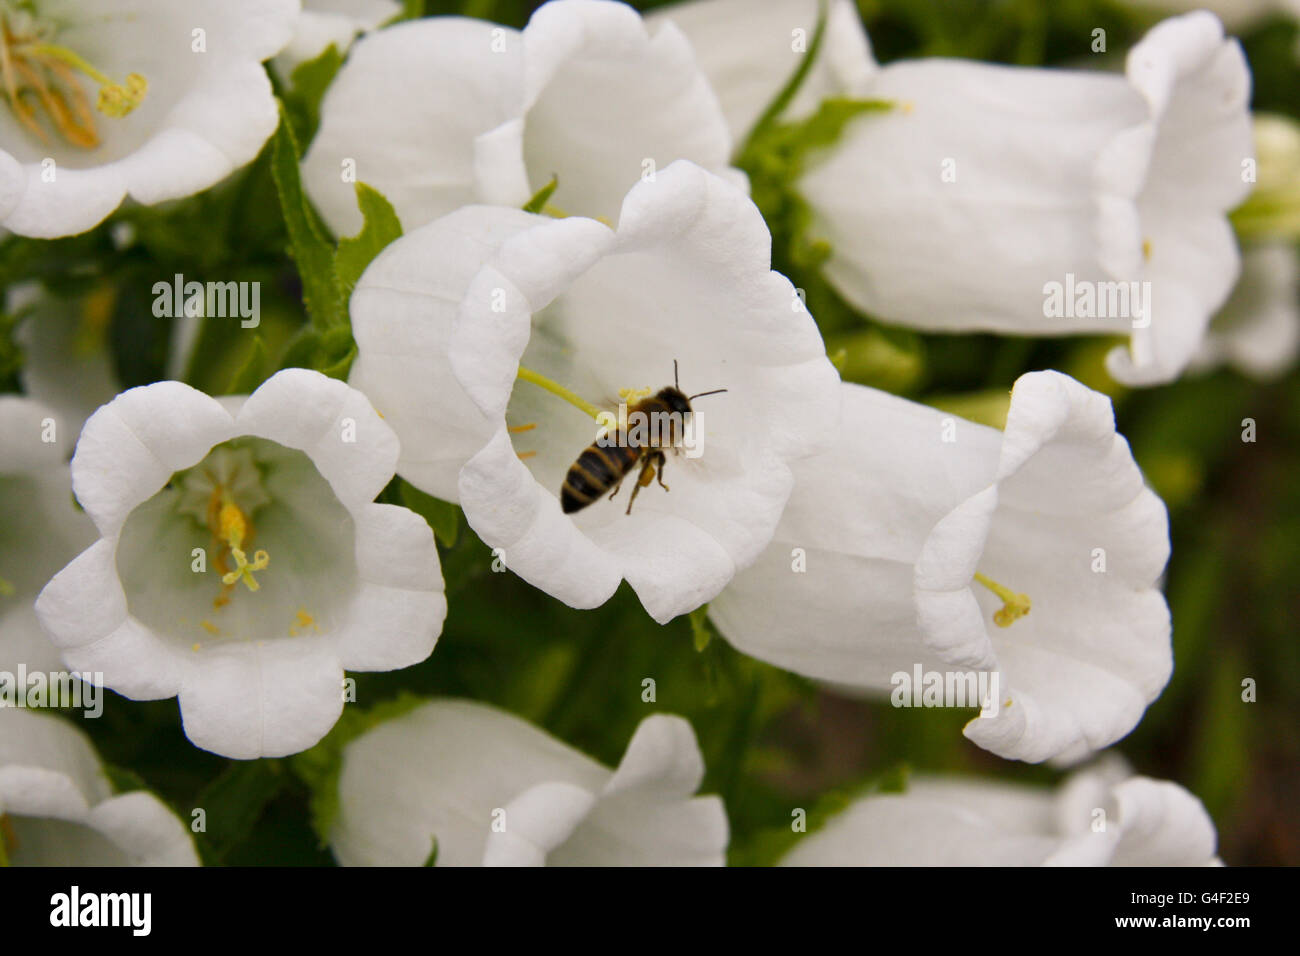 Bee collects nectar from flowers Stock Photo